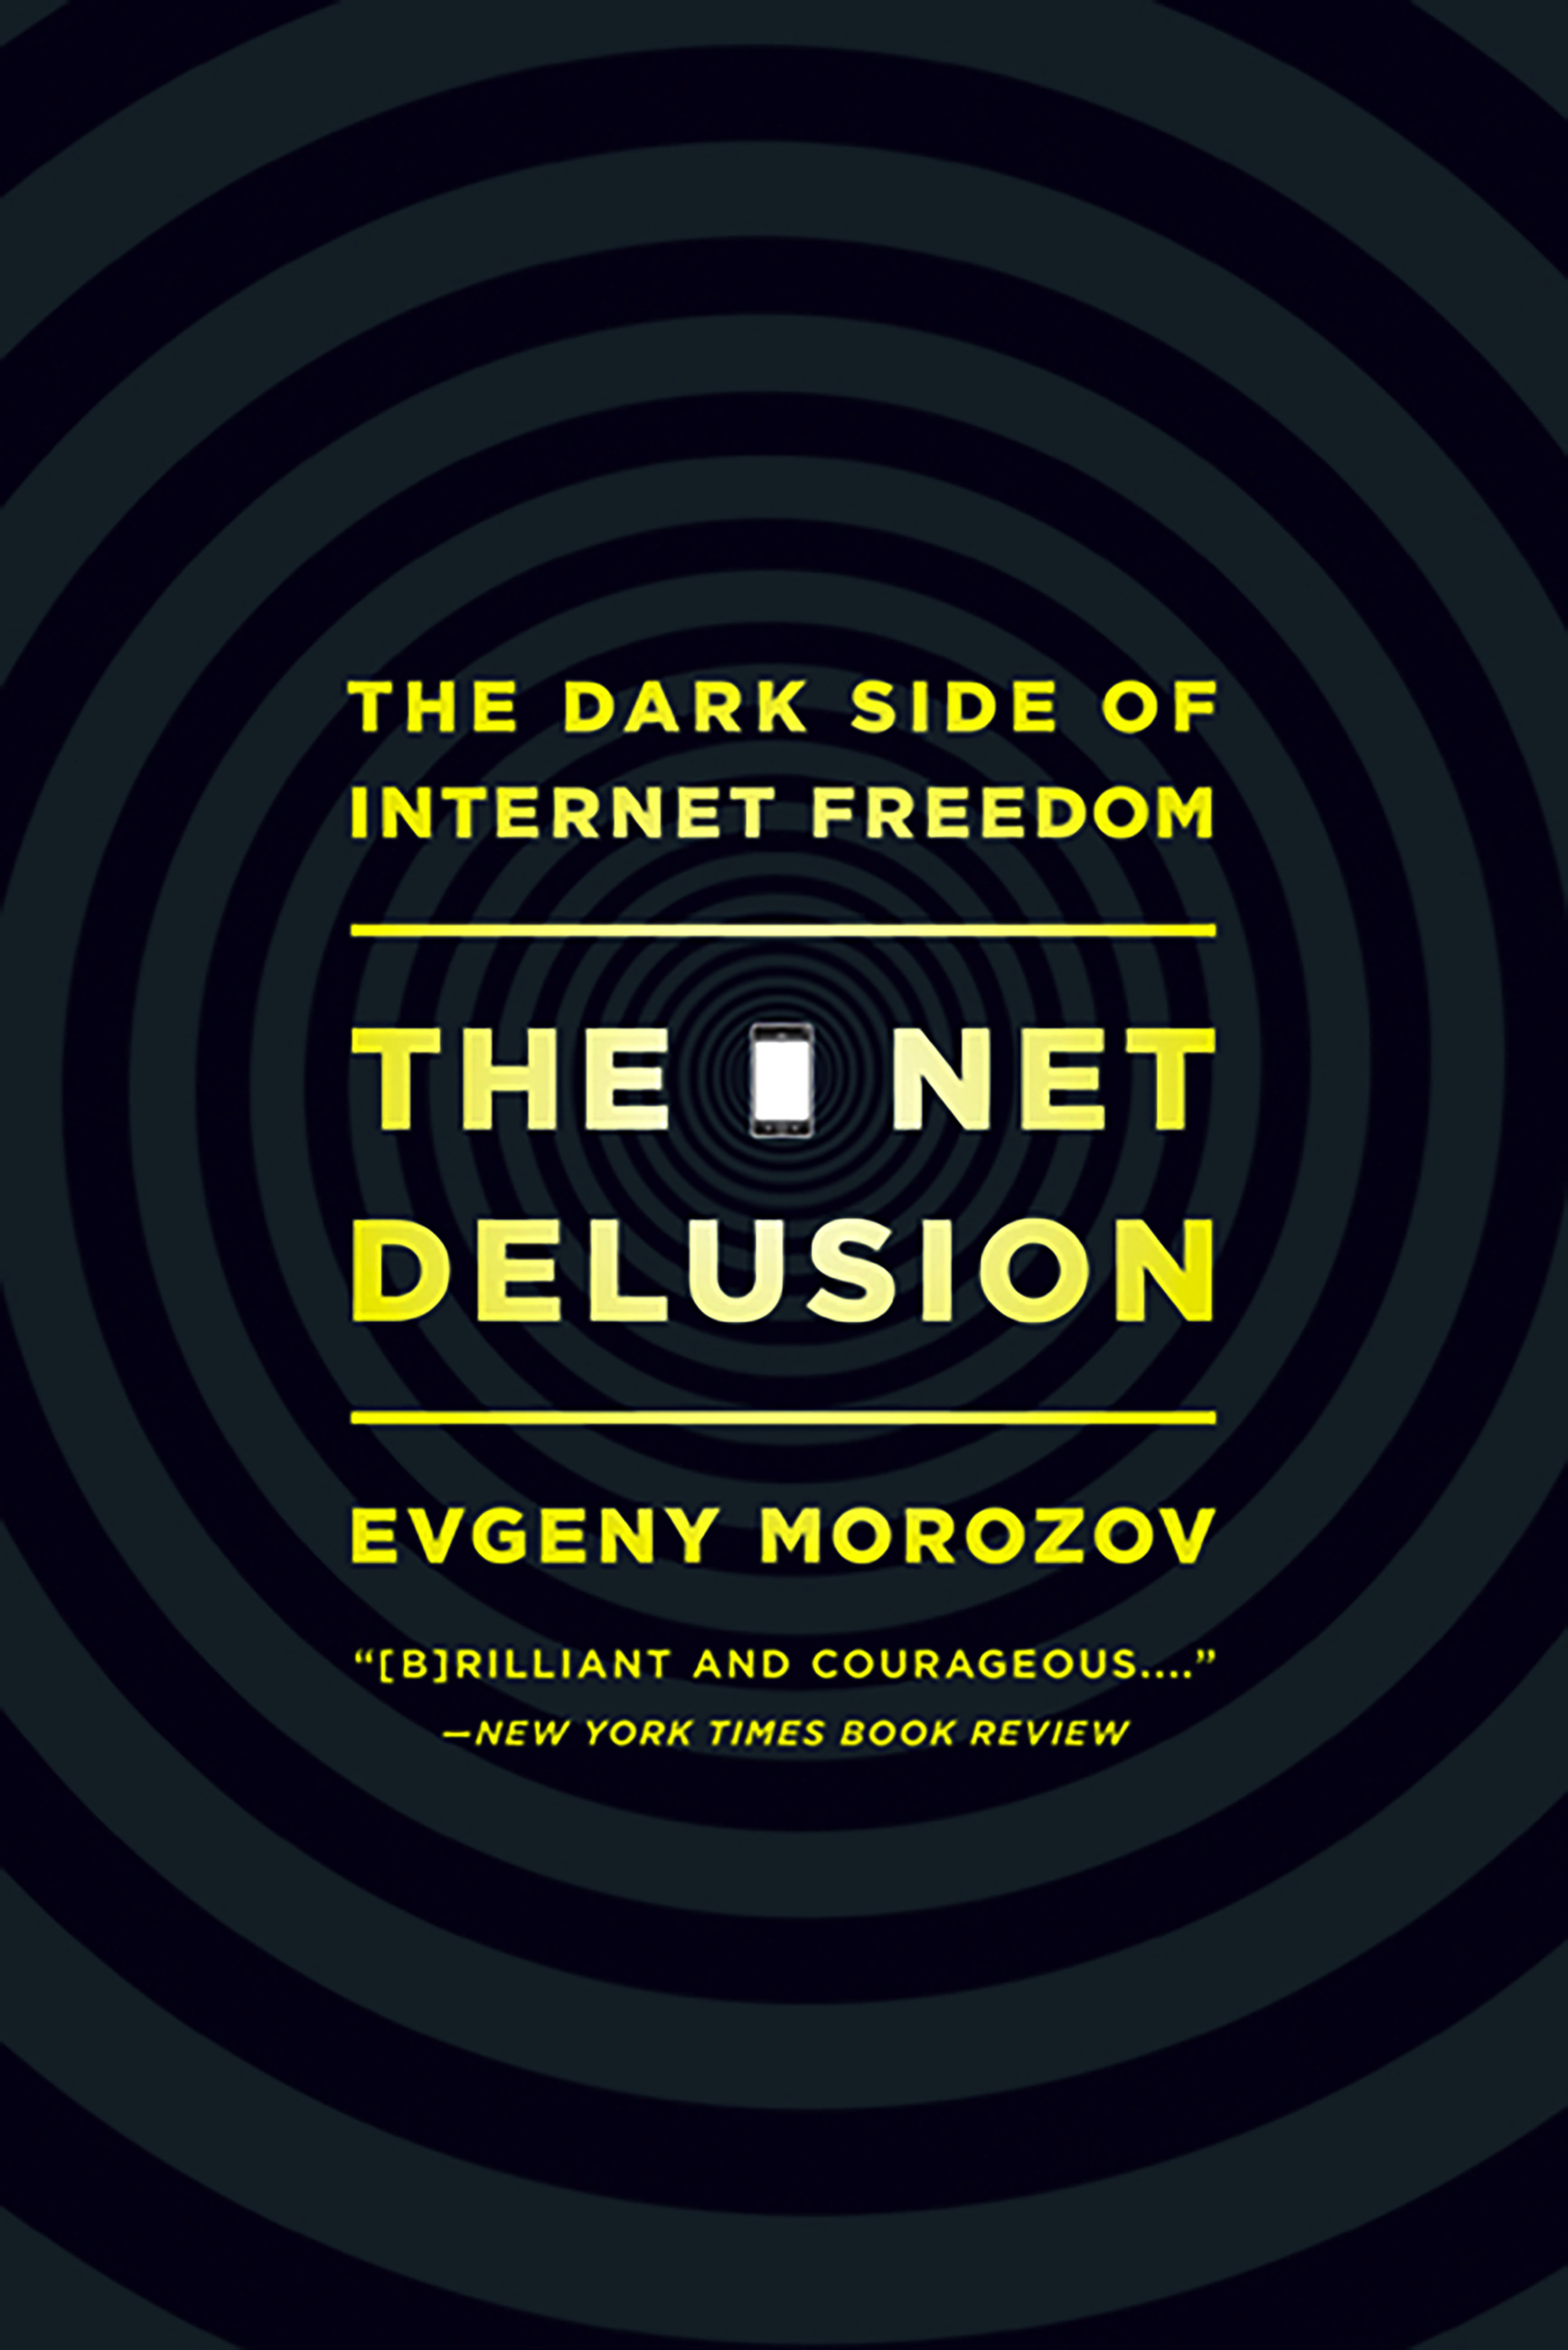 The Net Delusion, by Evgeny Morozov